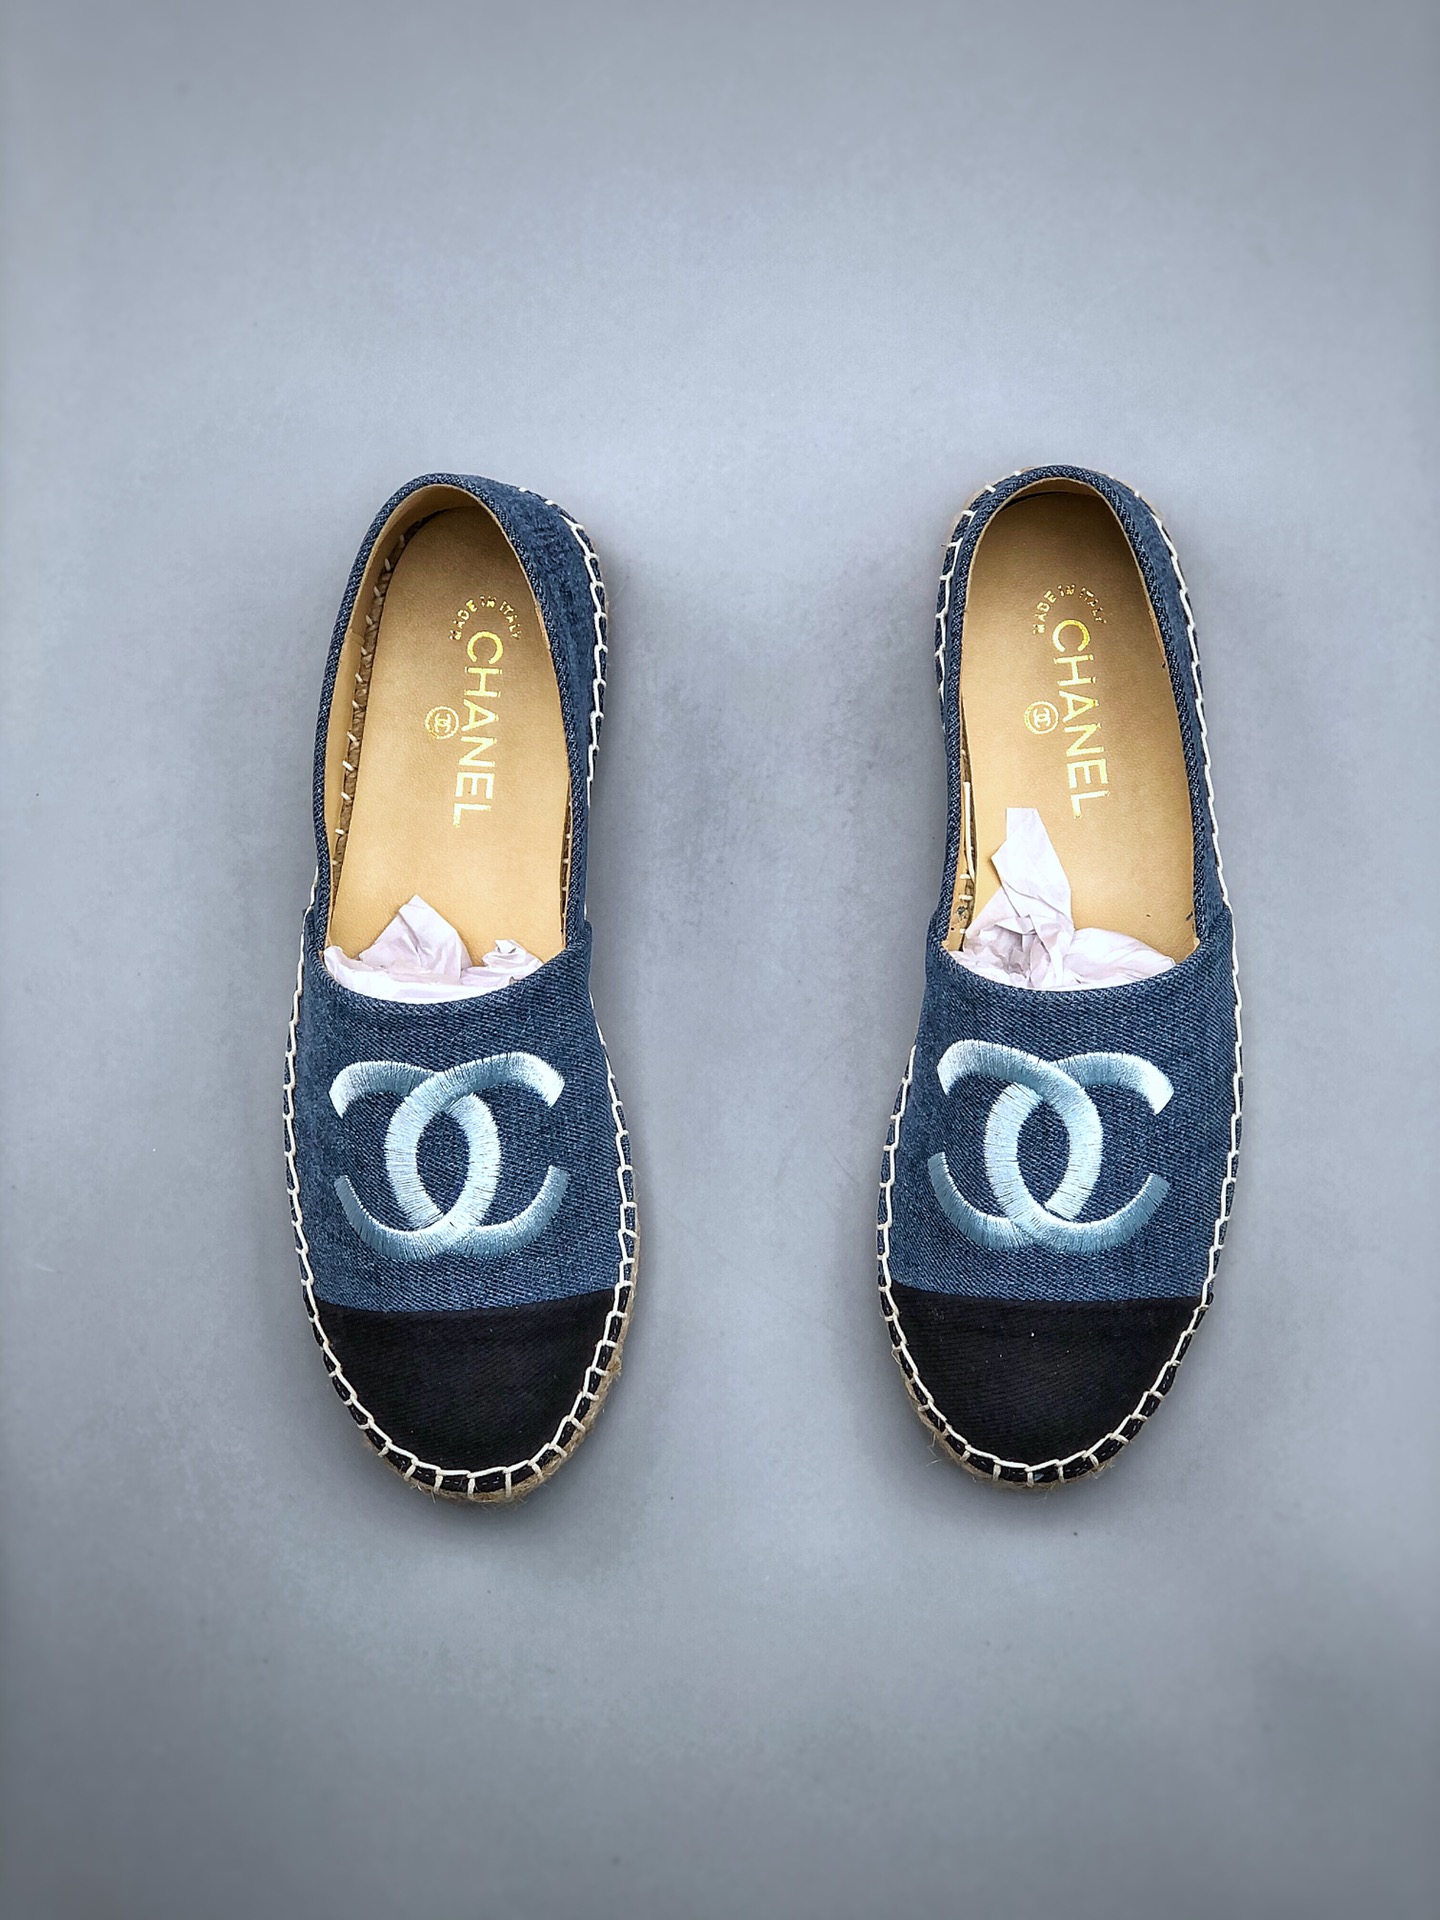 CHANEL Fisherman's Shoes Classic Chanel Fisherman's Shoes Evergreen